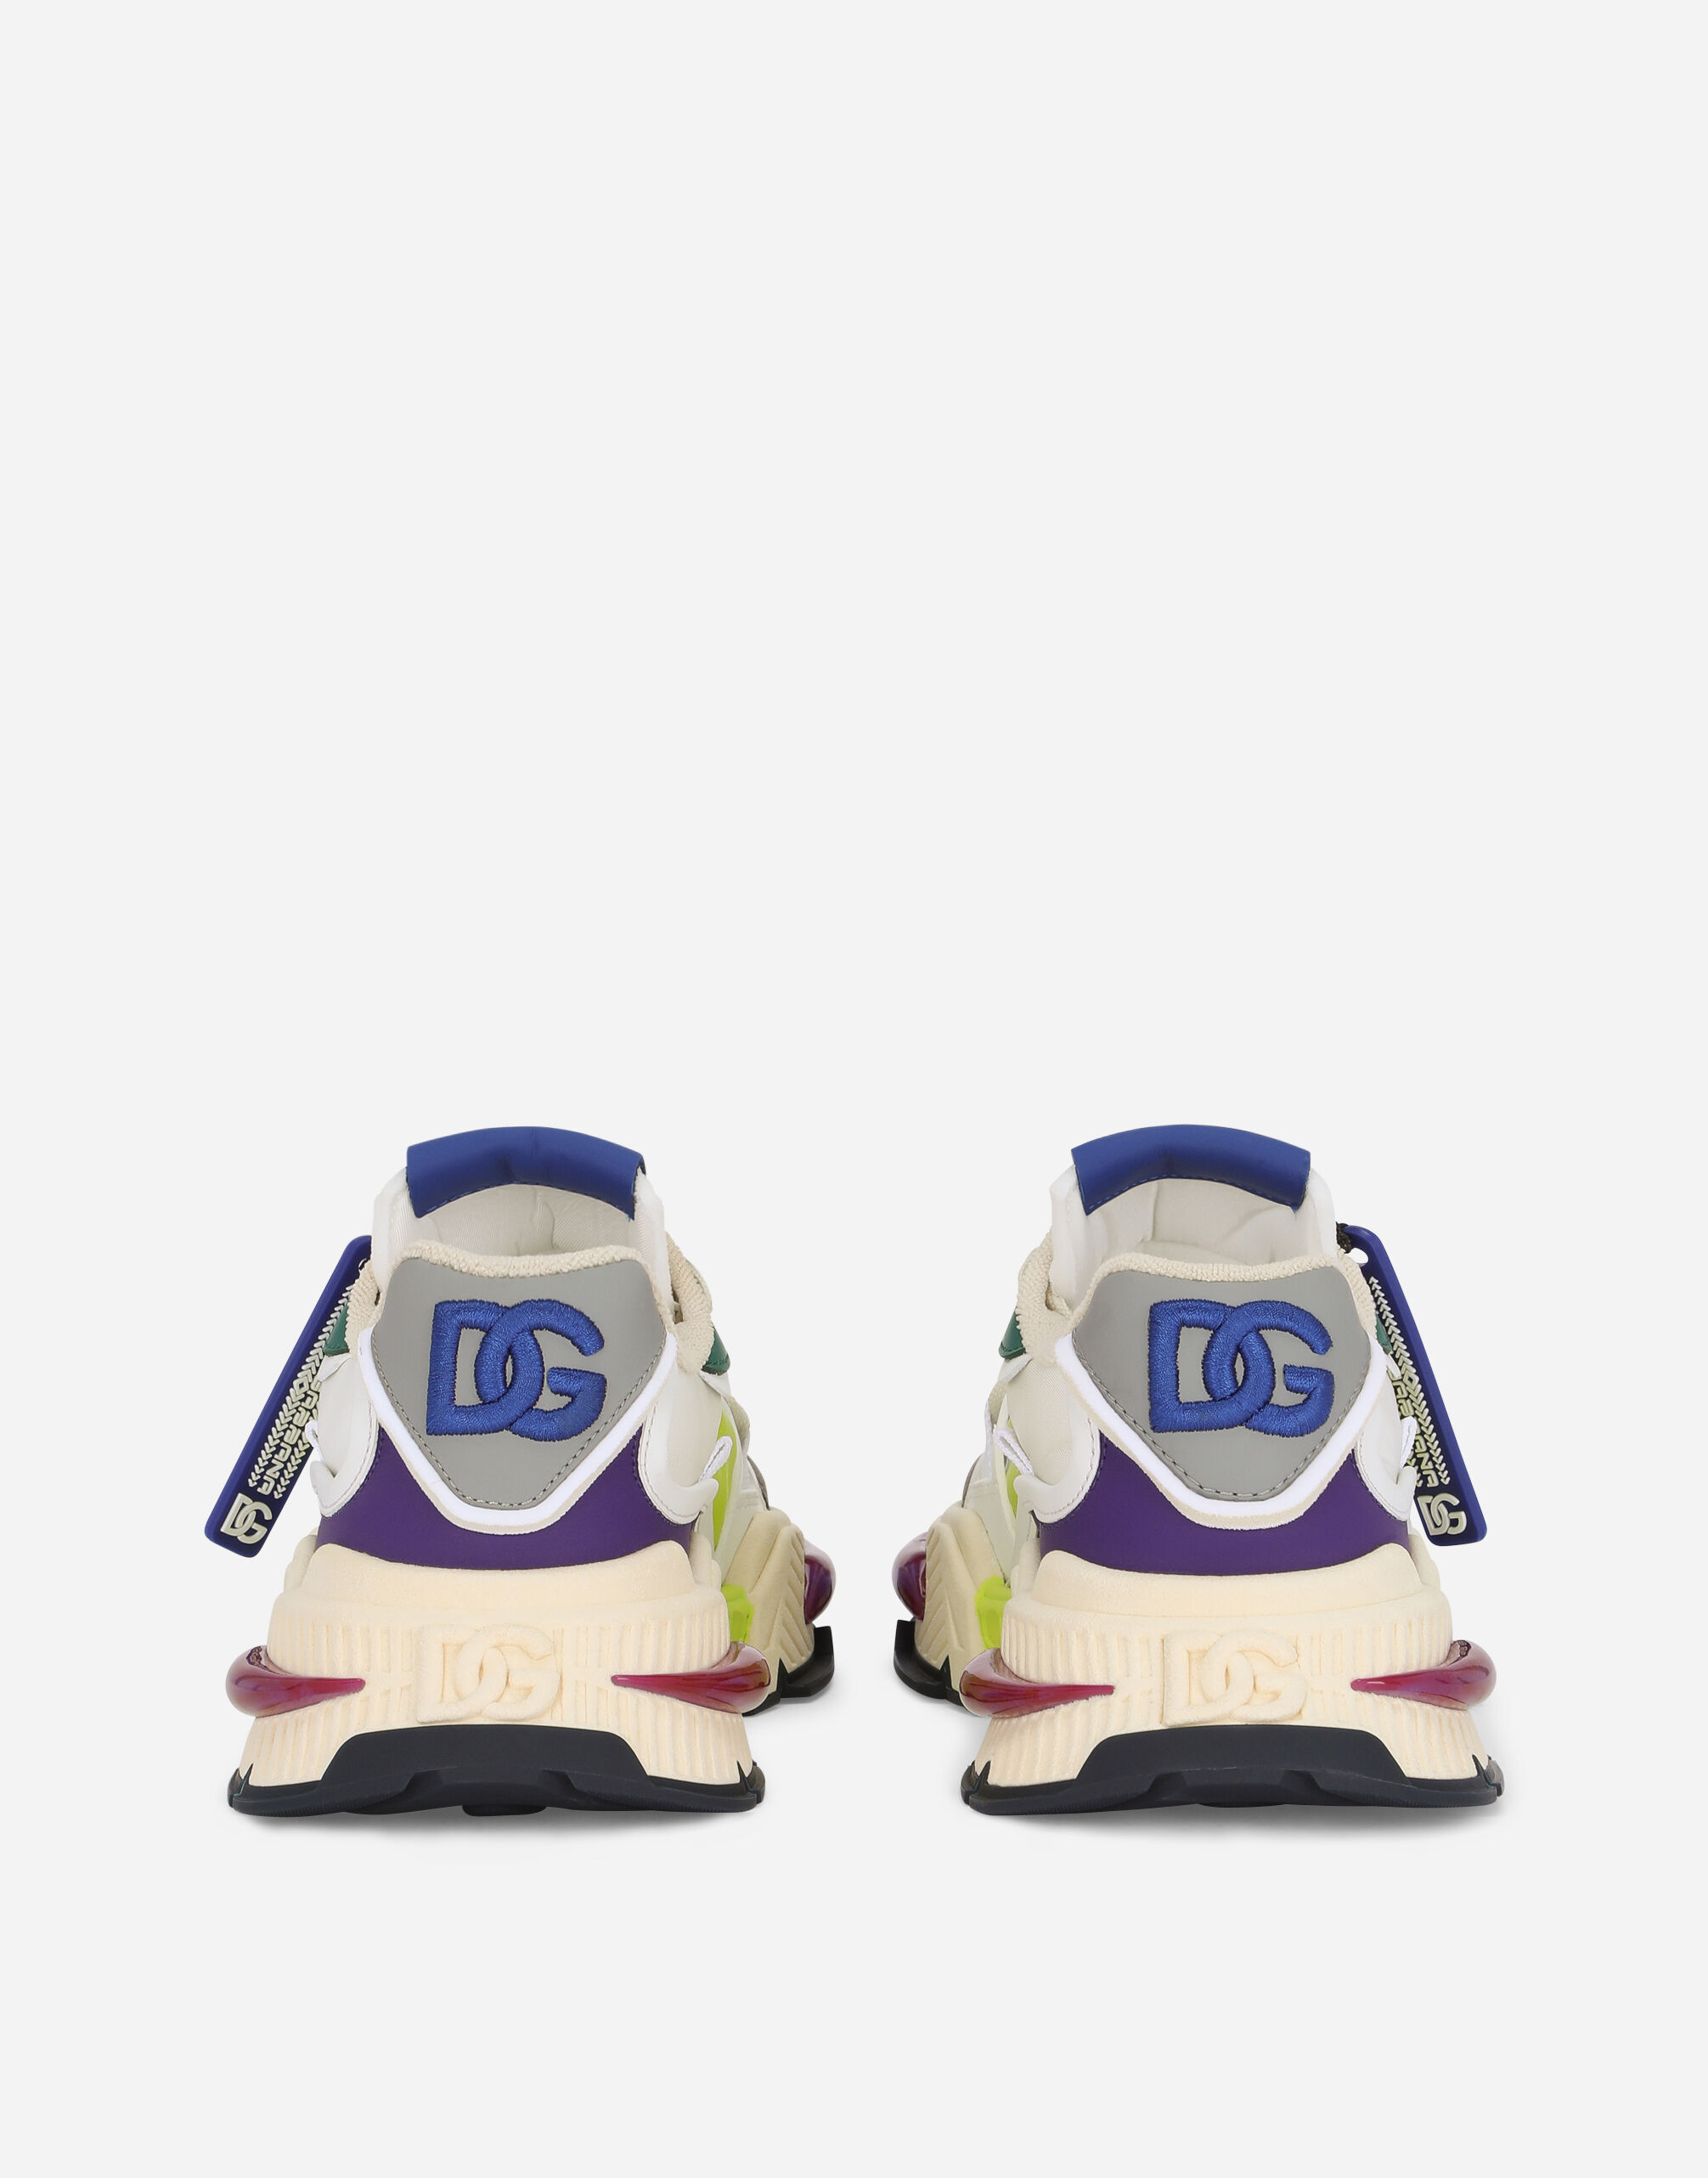 Mixed-material Airmaster sneakers in Multicolor for 